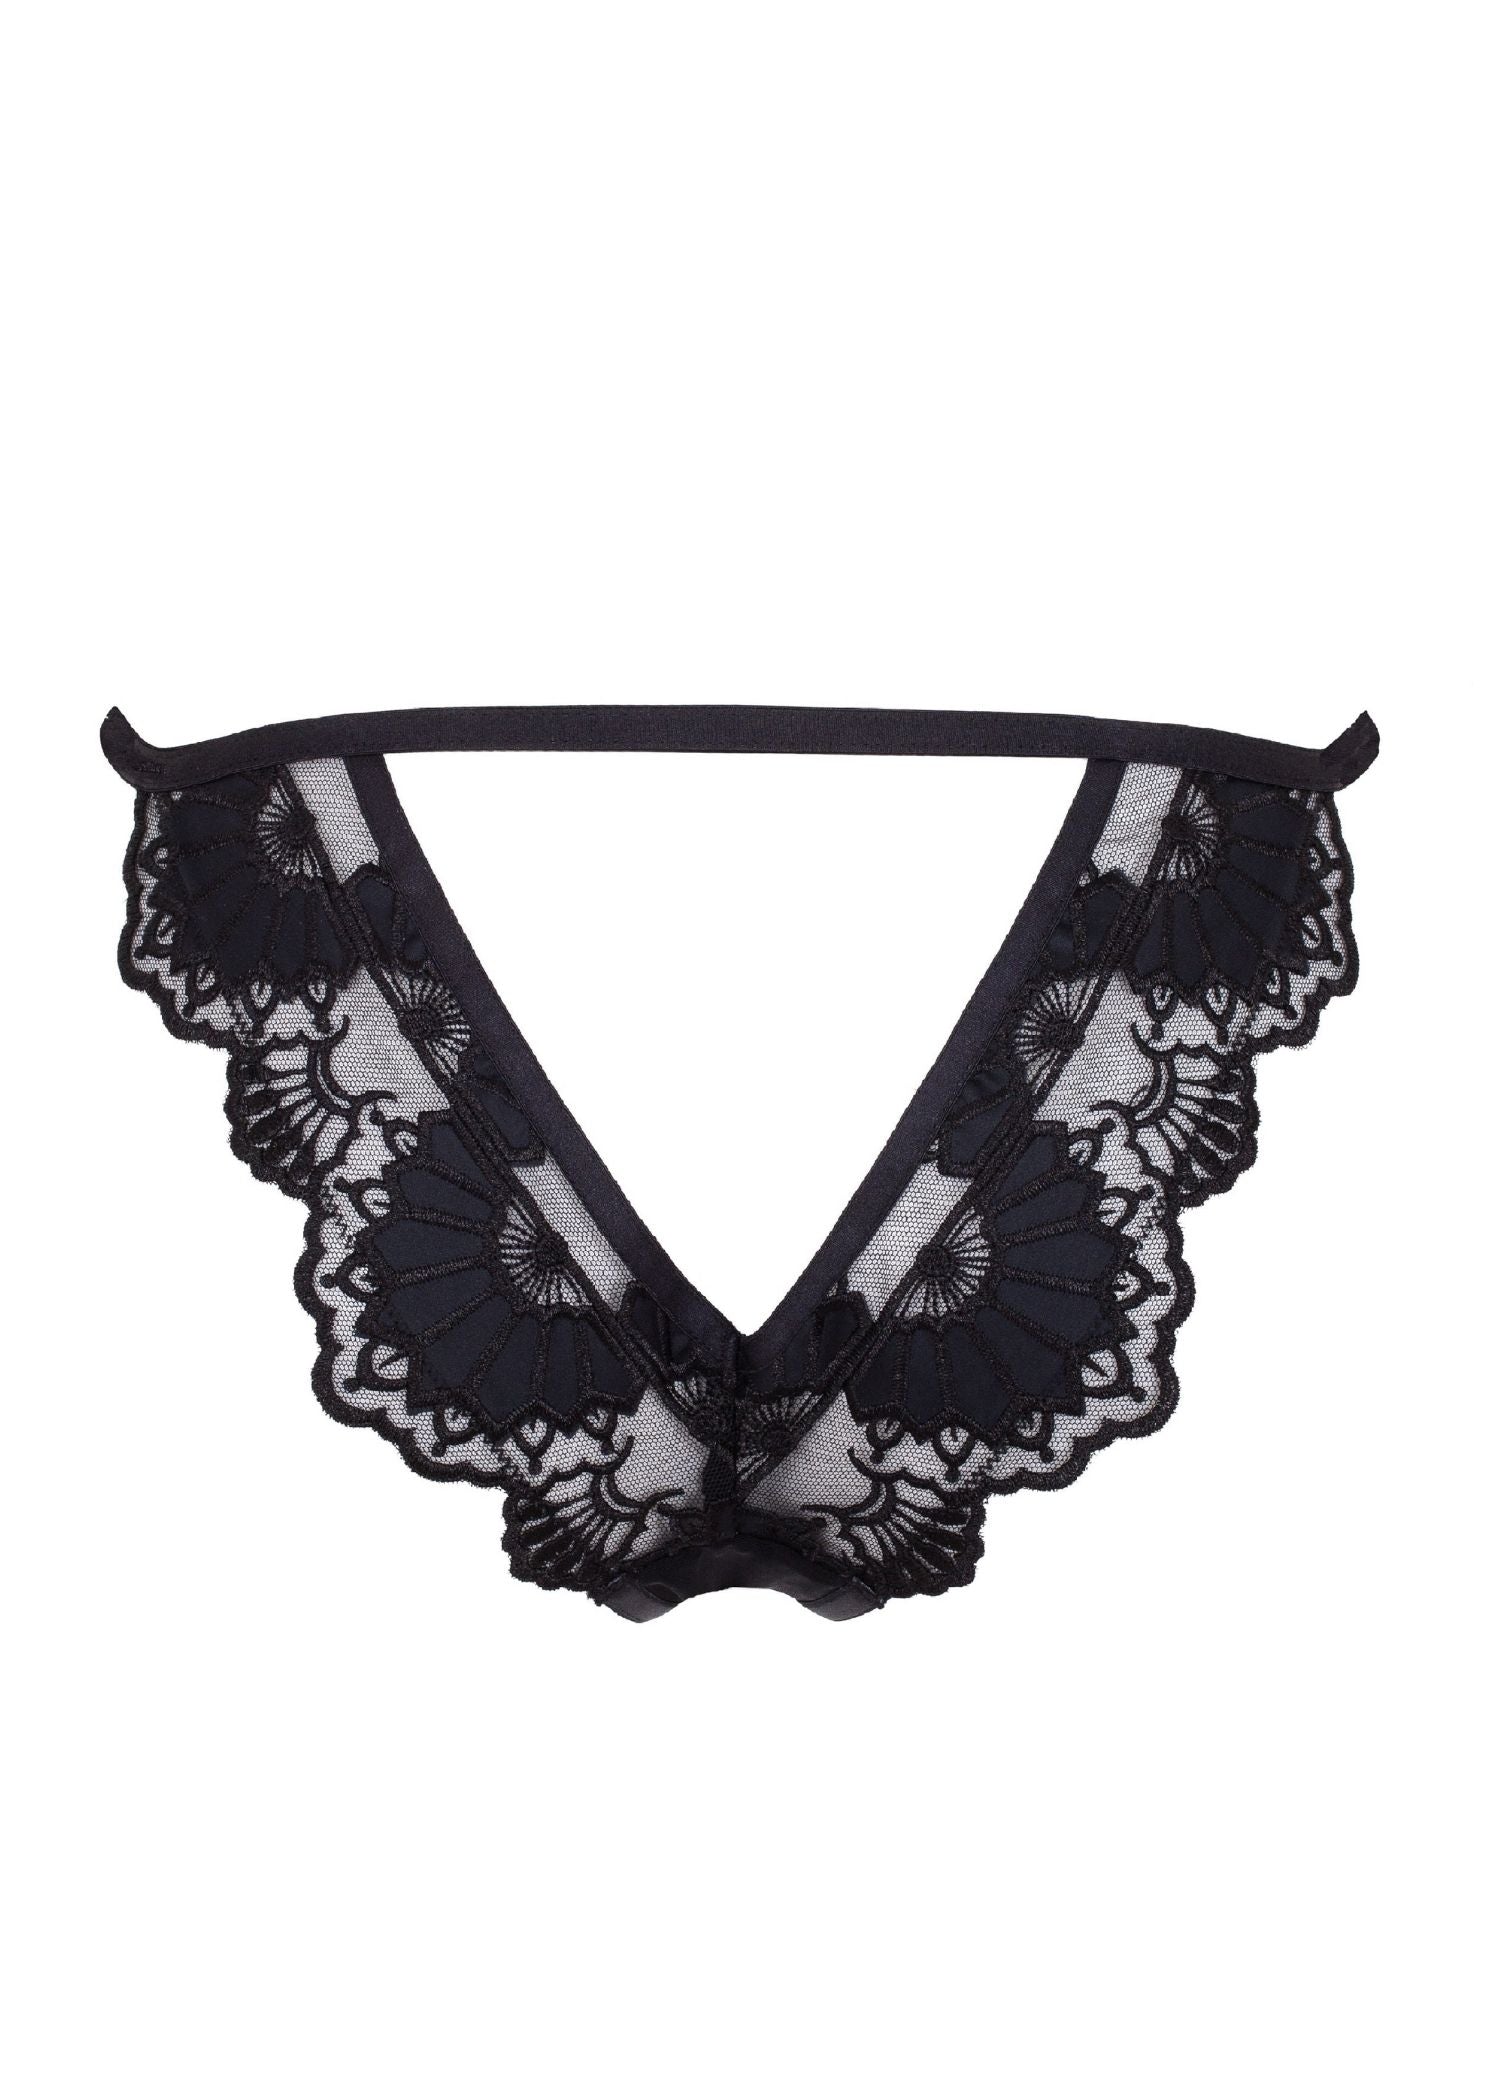 Black lace Sexy Open Crotch Knickers and Peephole Bra Set Lingerie 